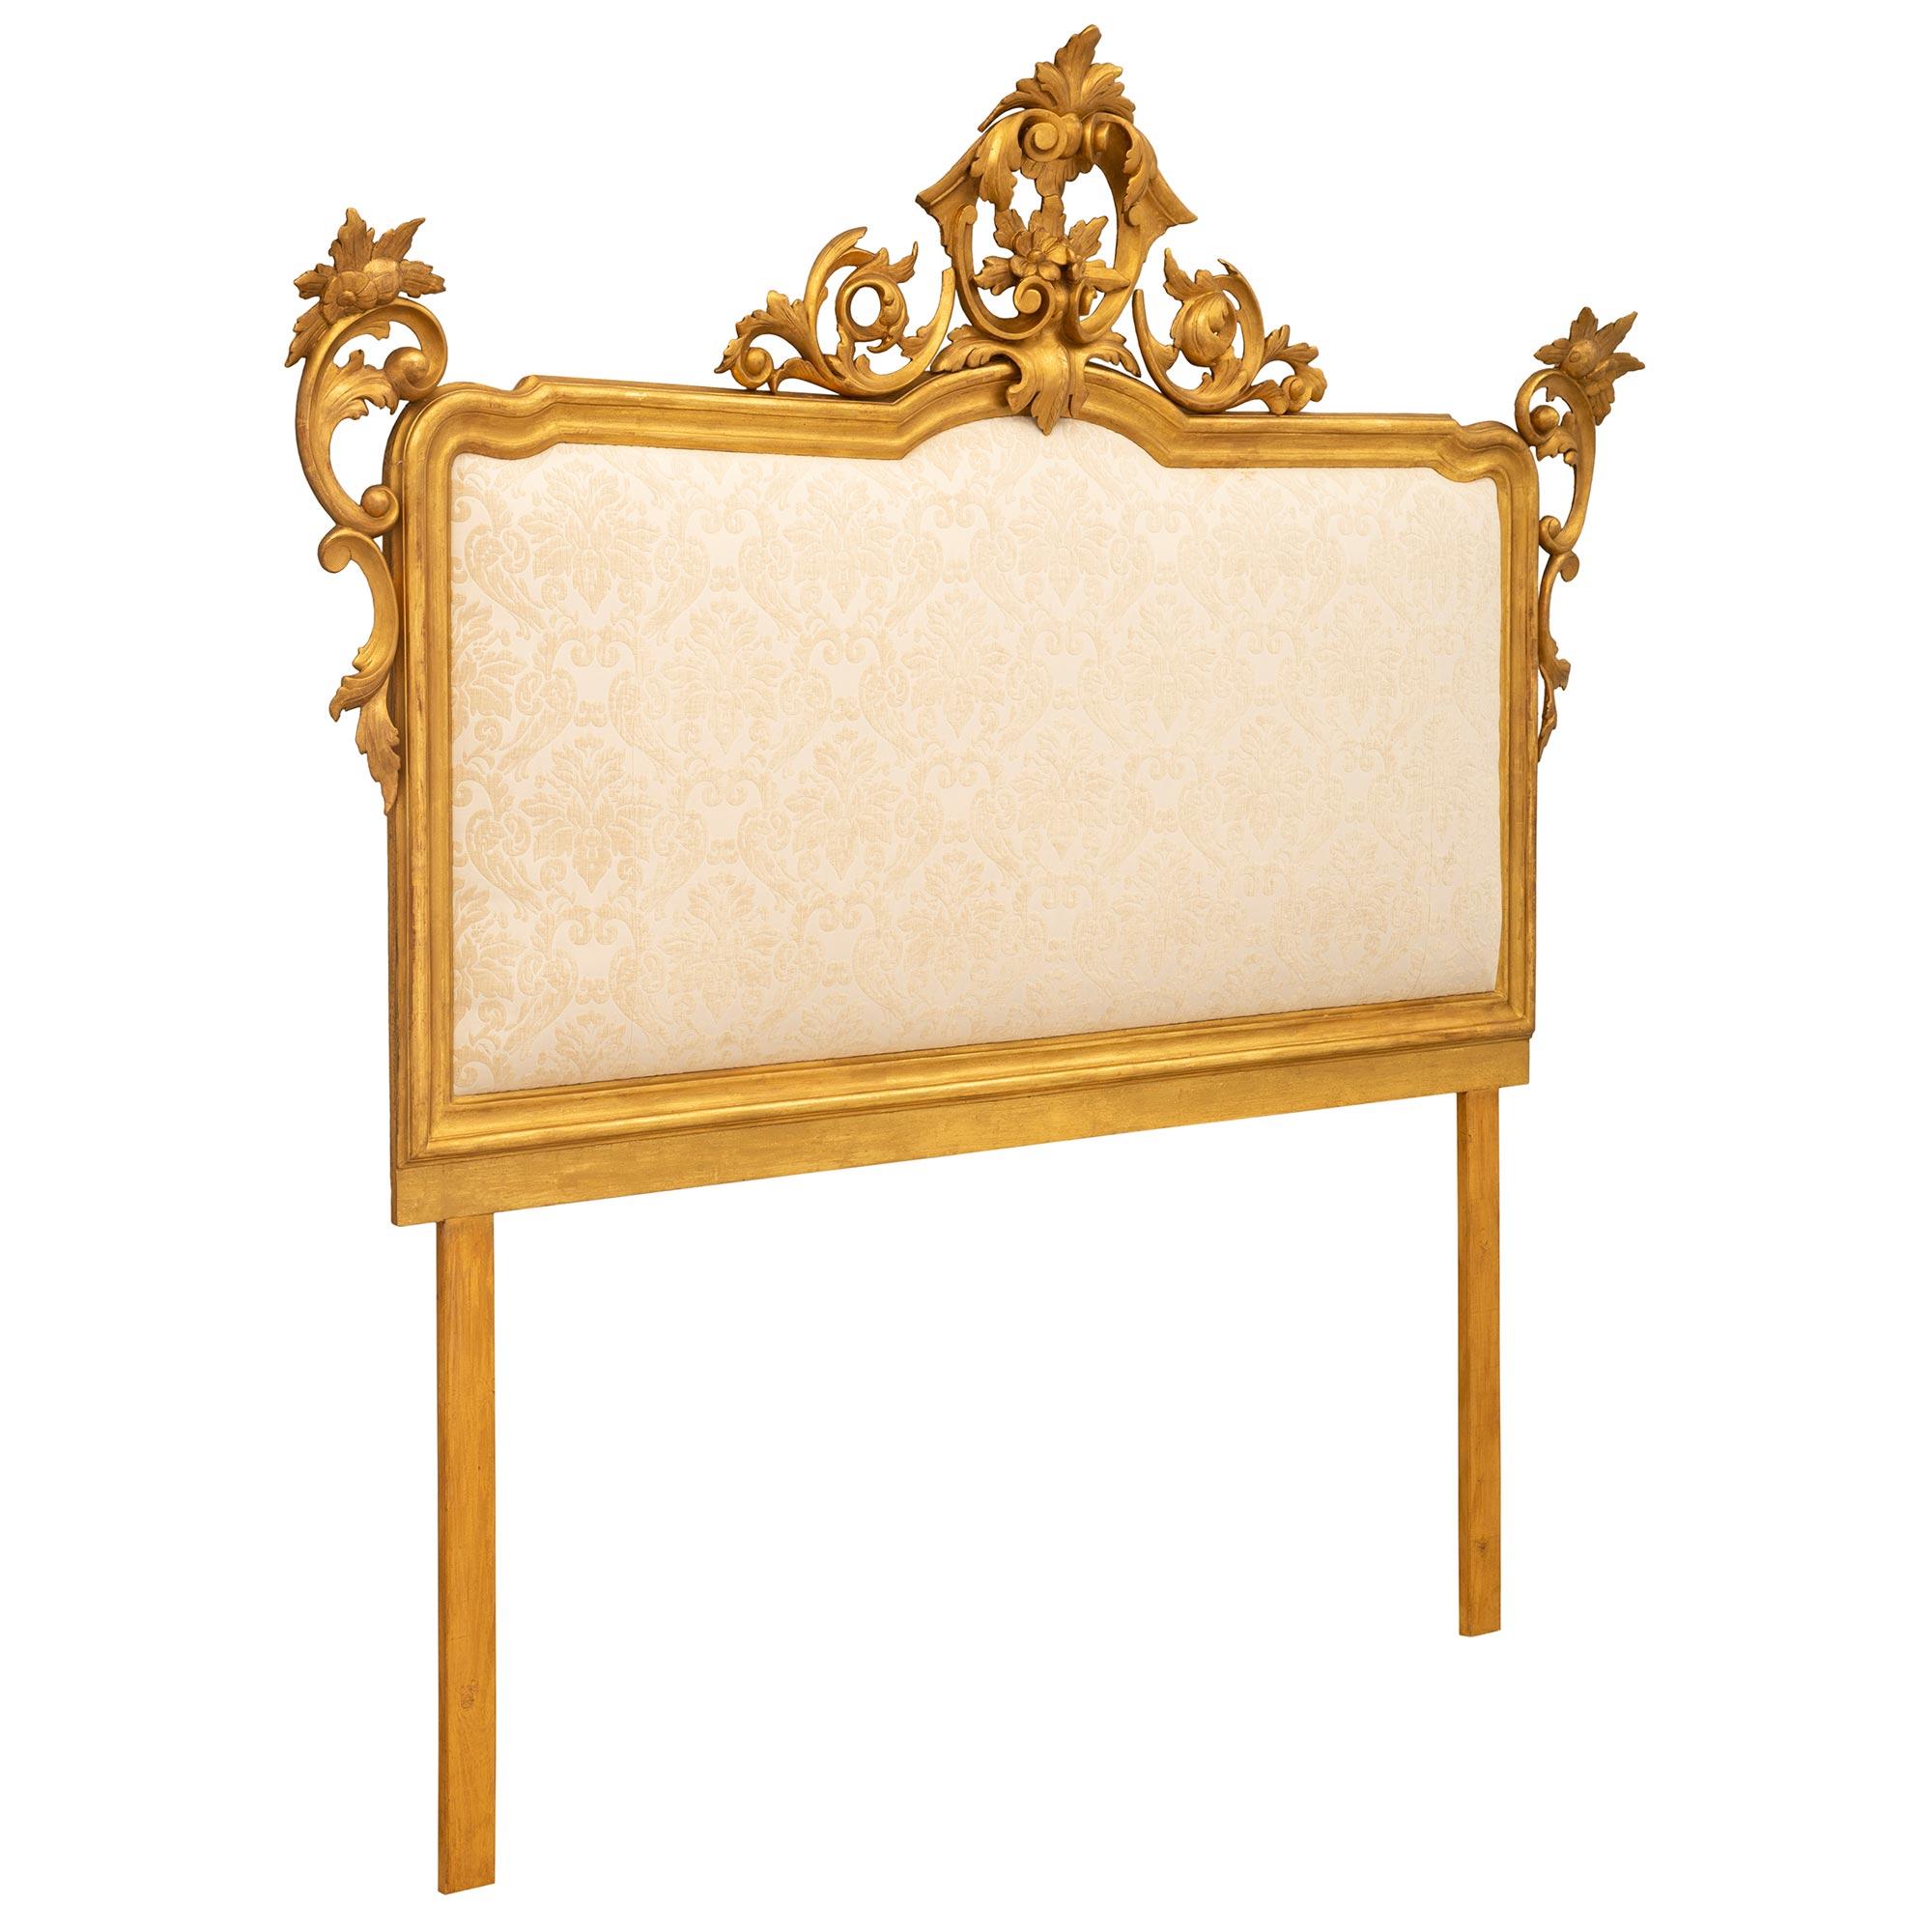 An exceptional Italian 19th century Baroque st. giltwood king sized upholstered head. The headboard is framed within an elegant wrap around mottled border with beautiful richly carved pierced scrolled foliate elements at each side. The striking